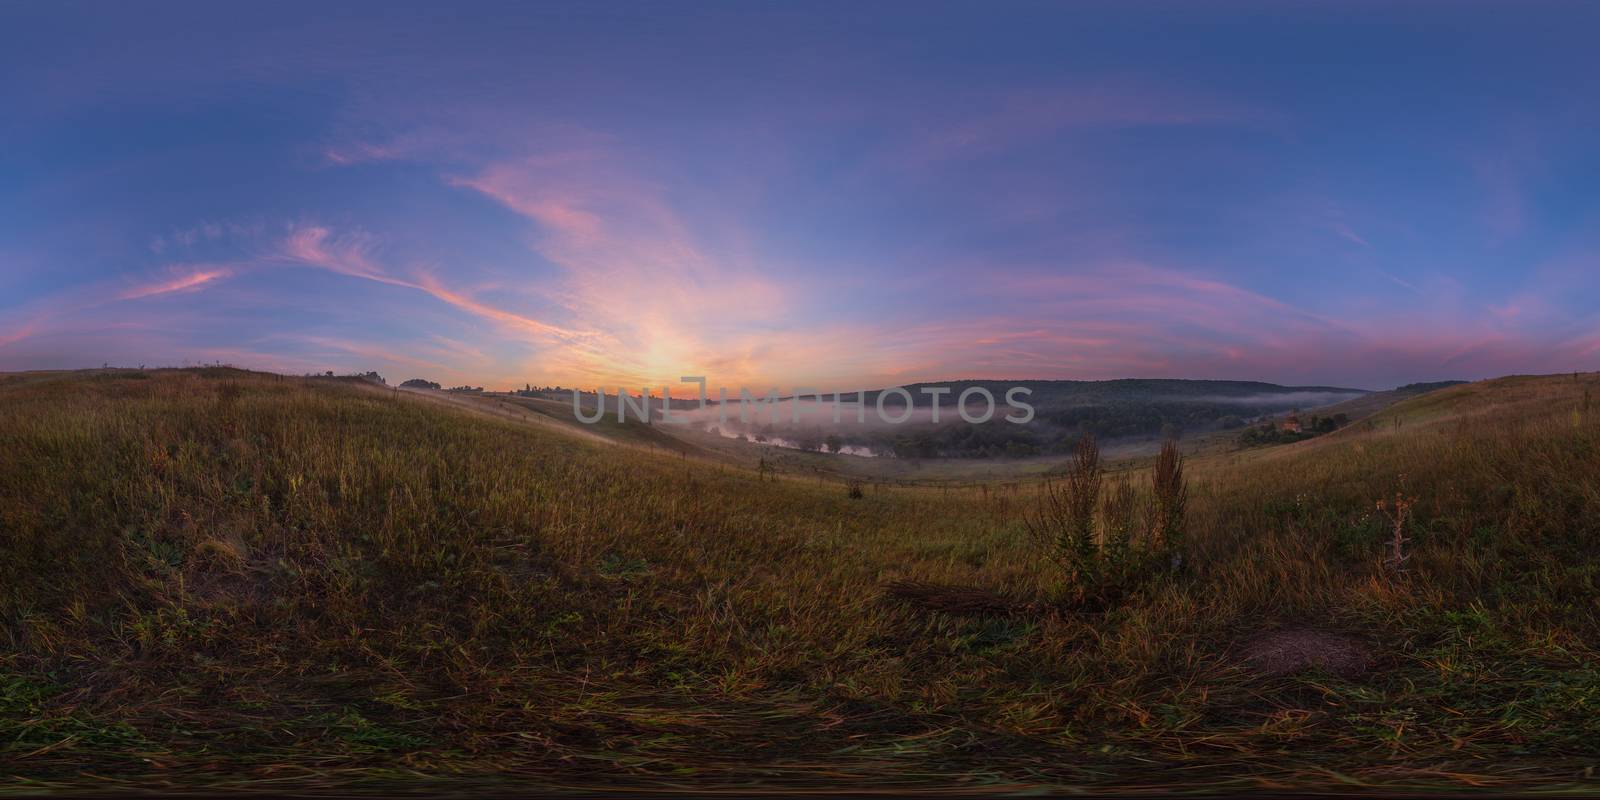 Spherical 360 degrees seamless panorama in equirectangular projection, panorama of natural landscape on river sunrise. VR content from ground level